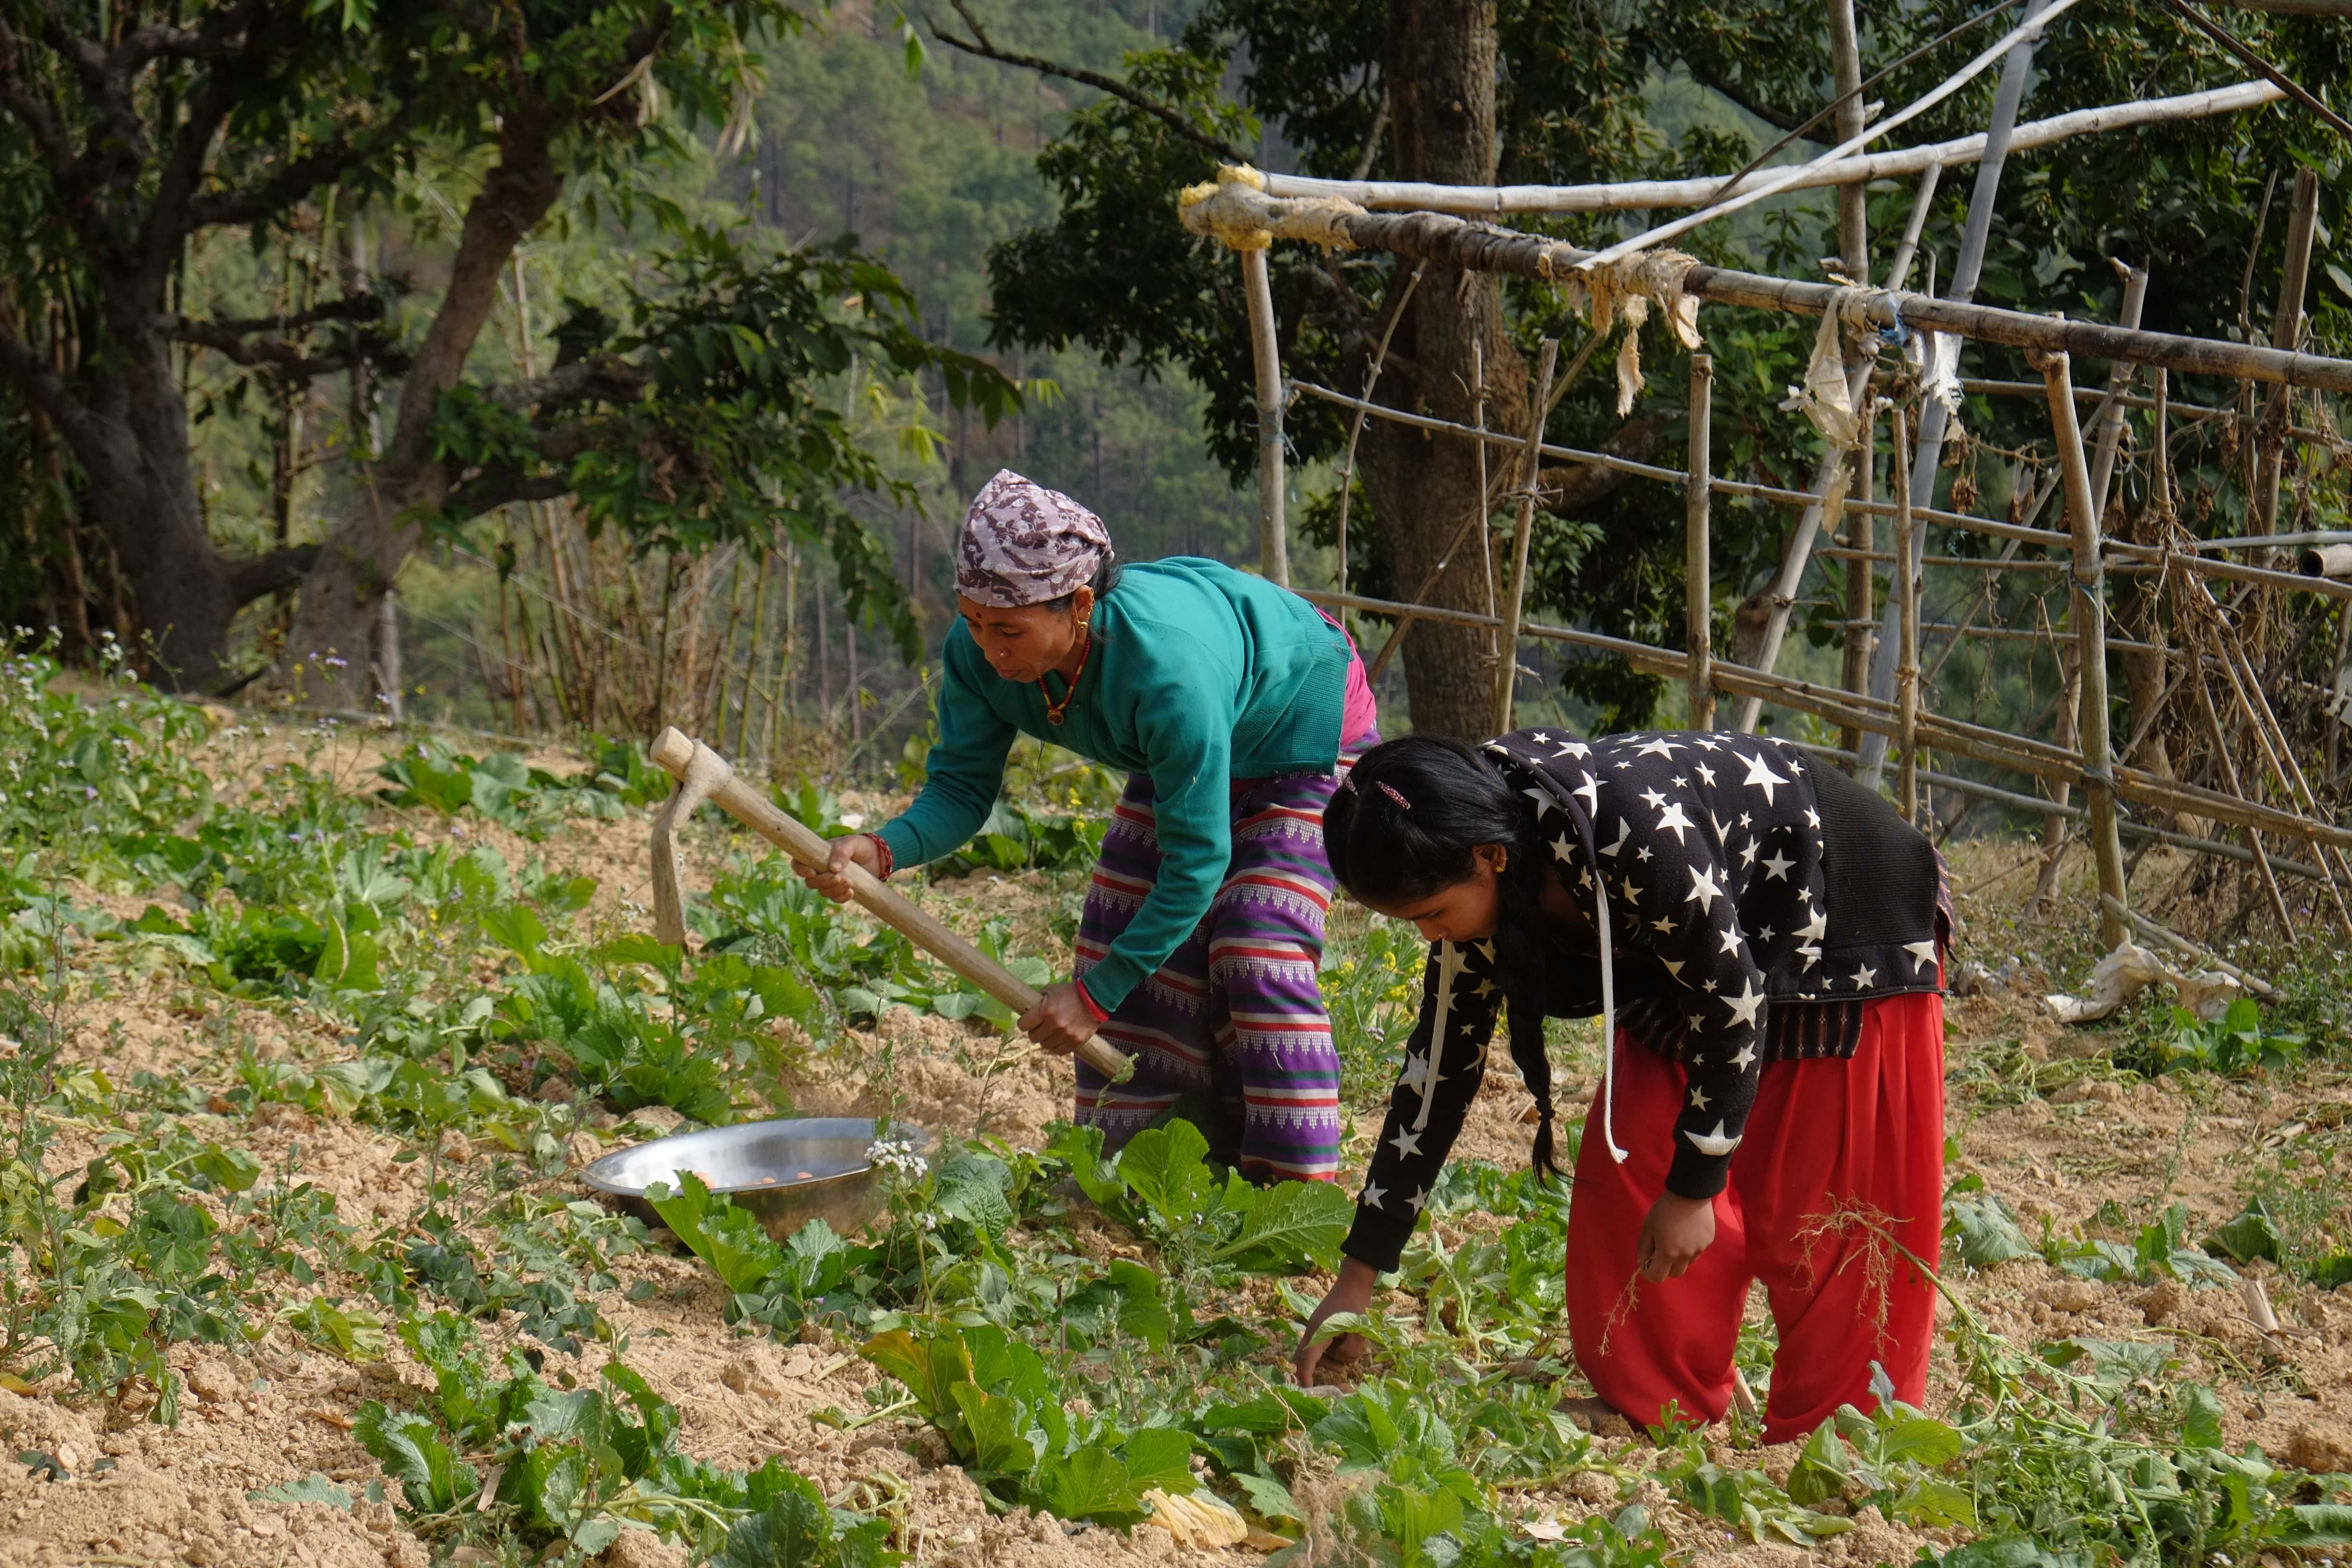 Oxfam has livelihood projects in various parts of Nepal that aim to empower women to learn agricultural techniques to adapt to climate change. (Photo: Wingo Chan / Oxfam)